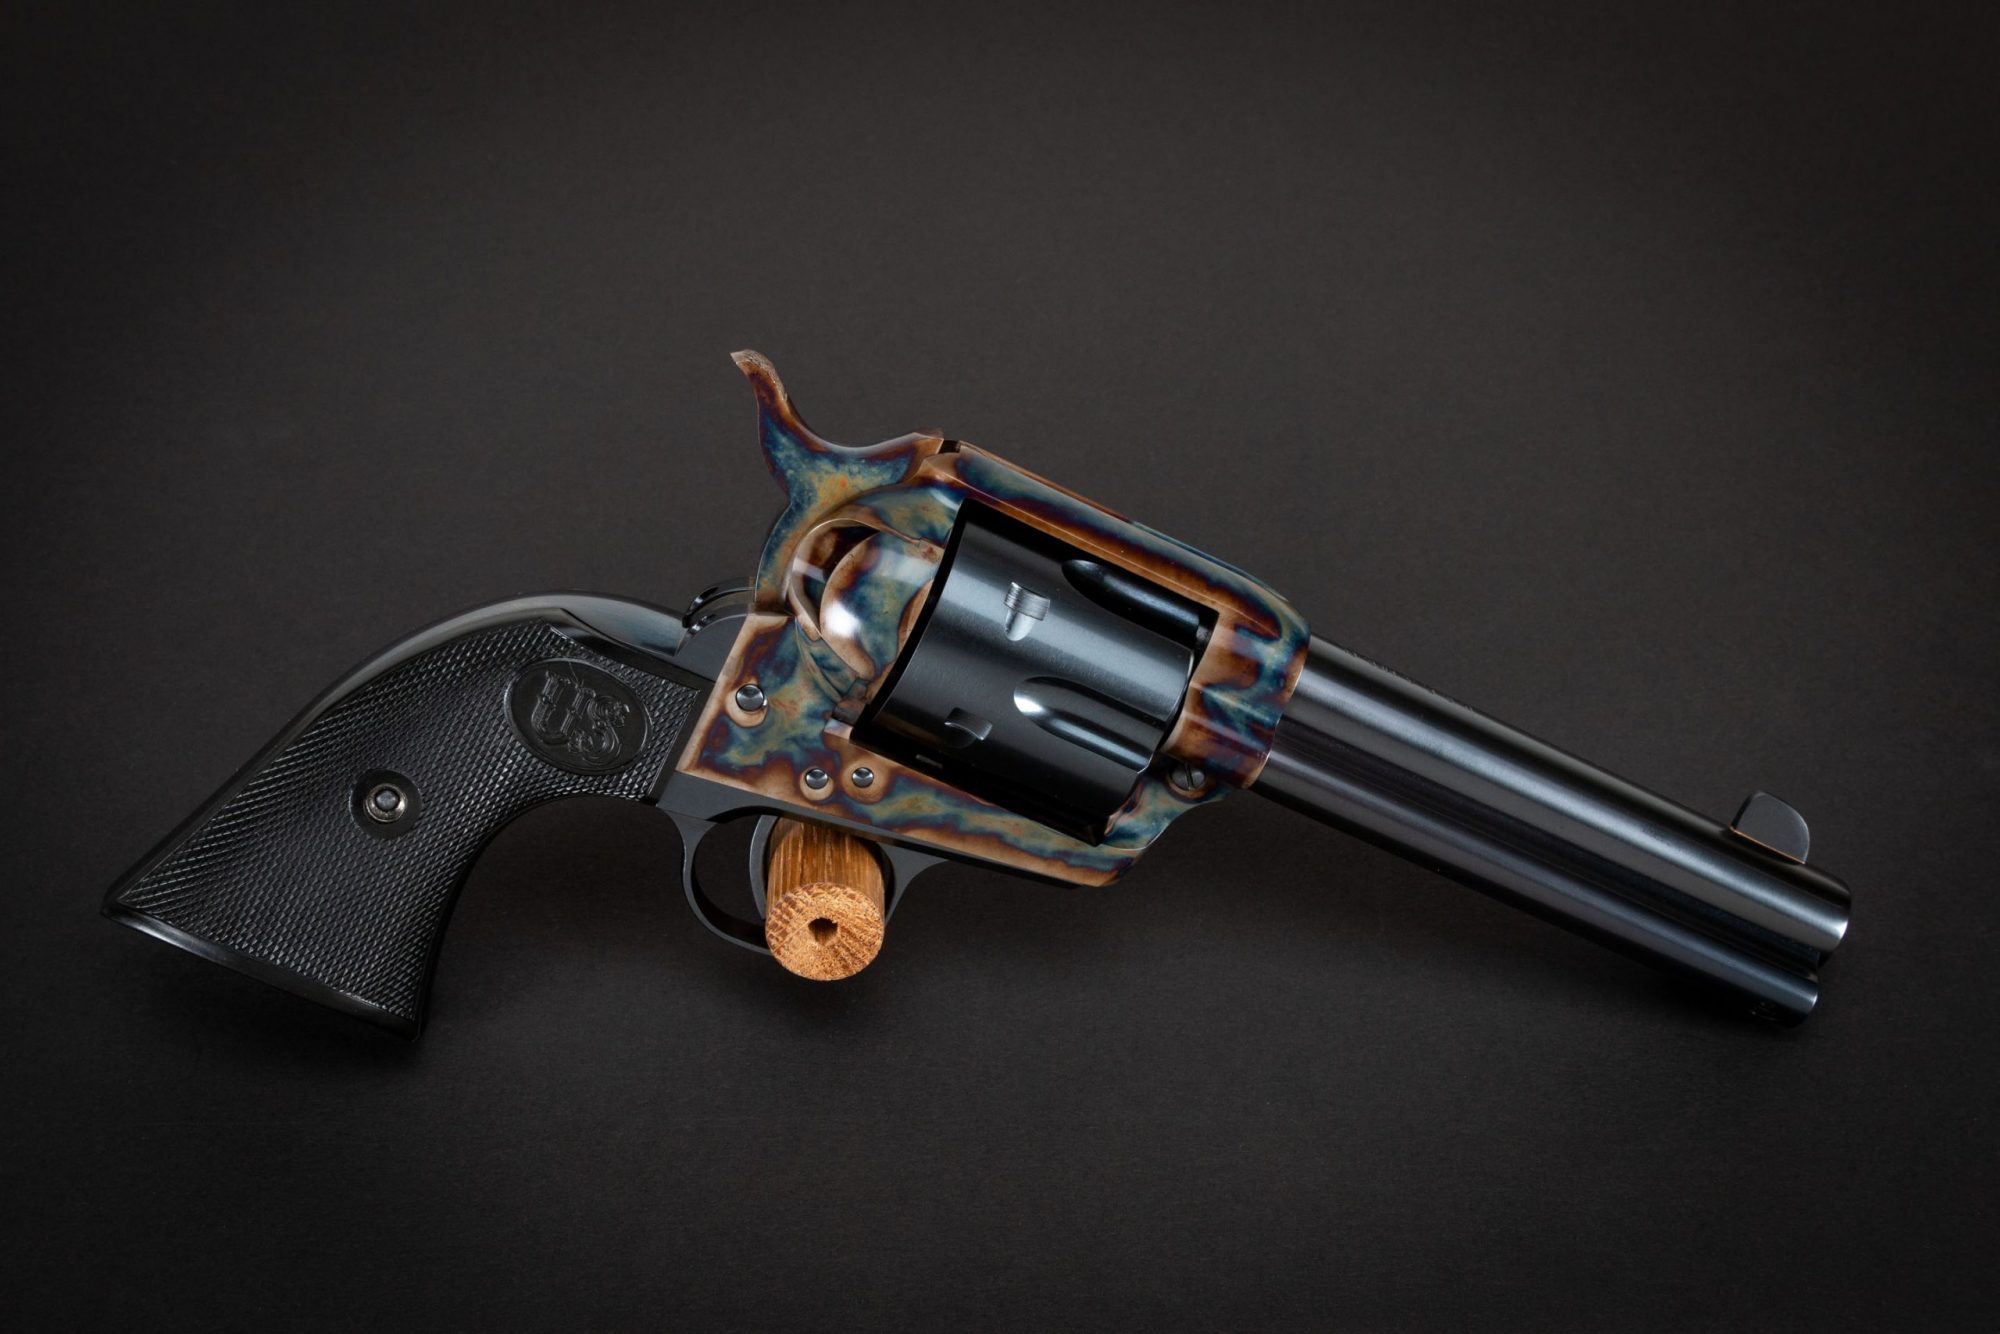 Photo of a color case hardened U.S. Fire Arms SAA revolver, featuring restoration-grade bone charcoal color case hardening by Turnbull Restoration of Bloomfield, NY